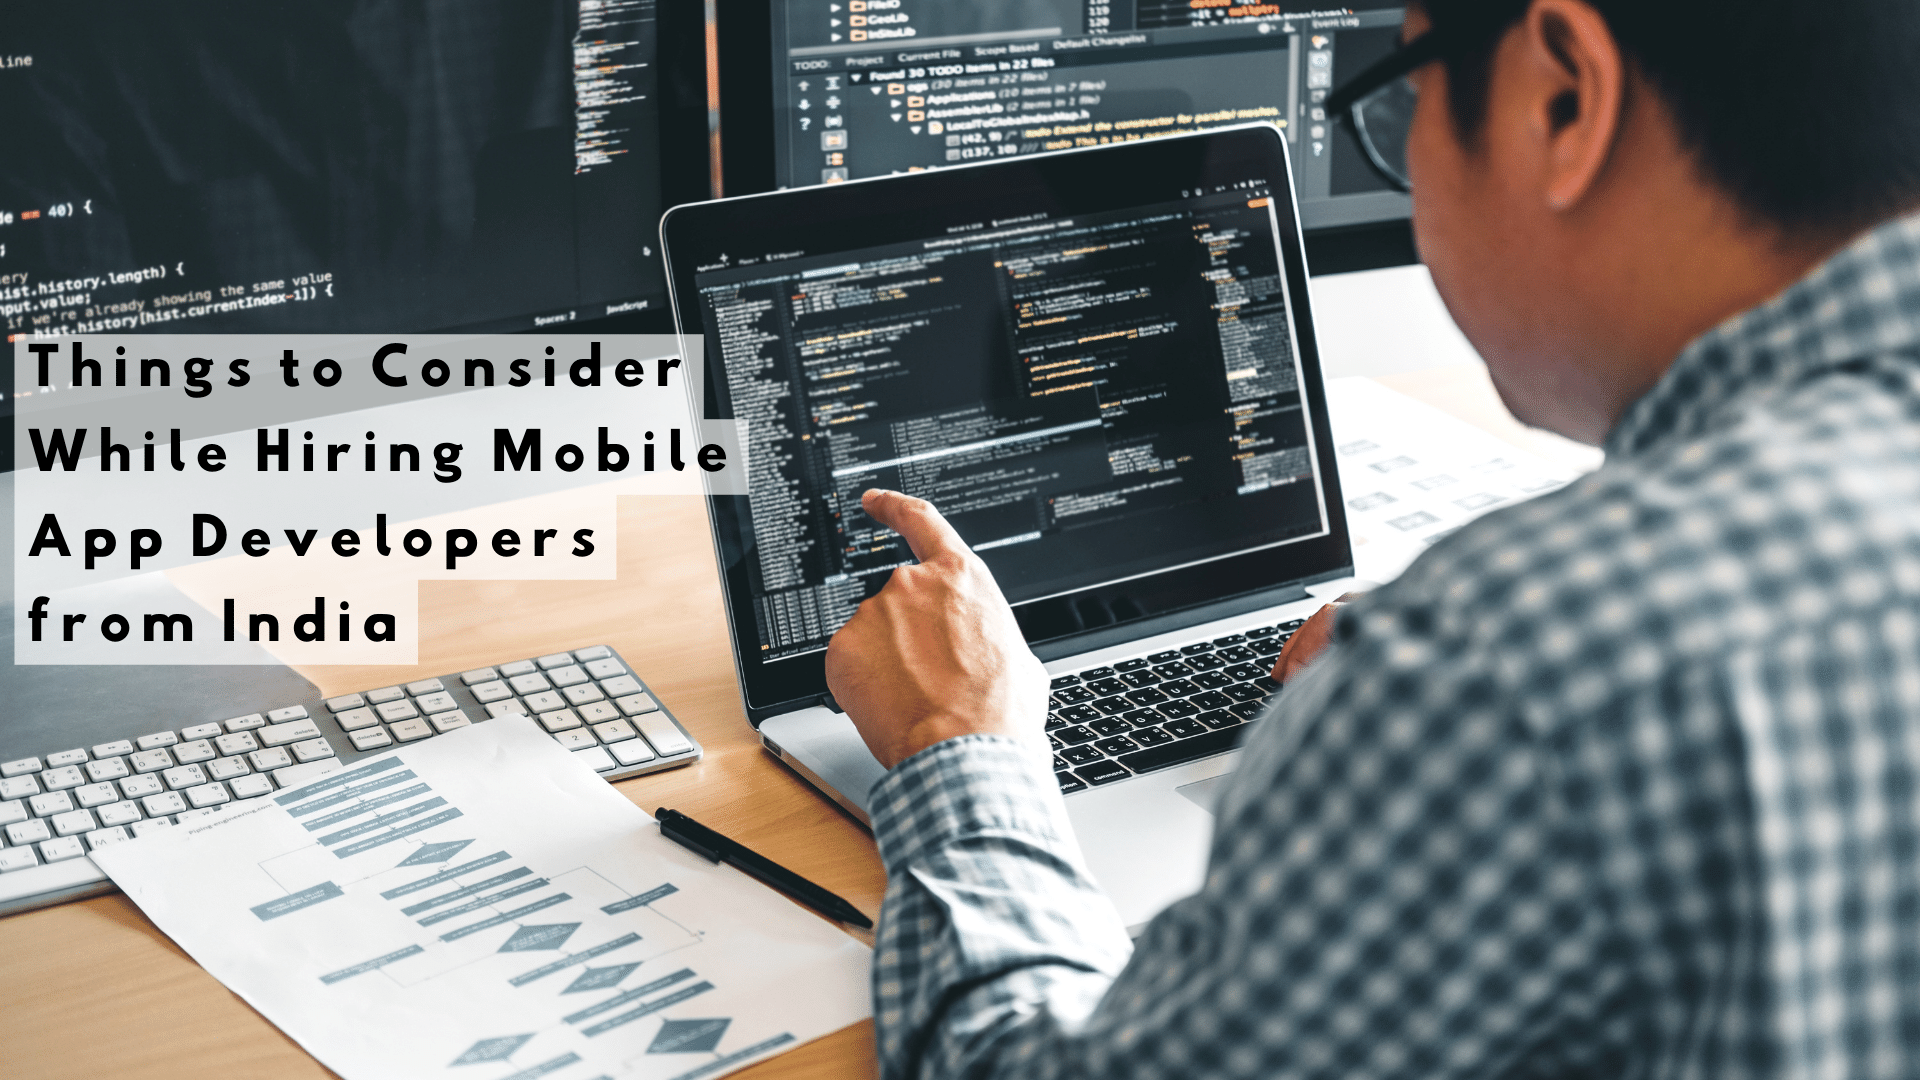 Things to Consider While Hiring Mobile App Developers from India